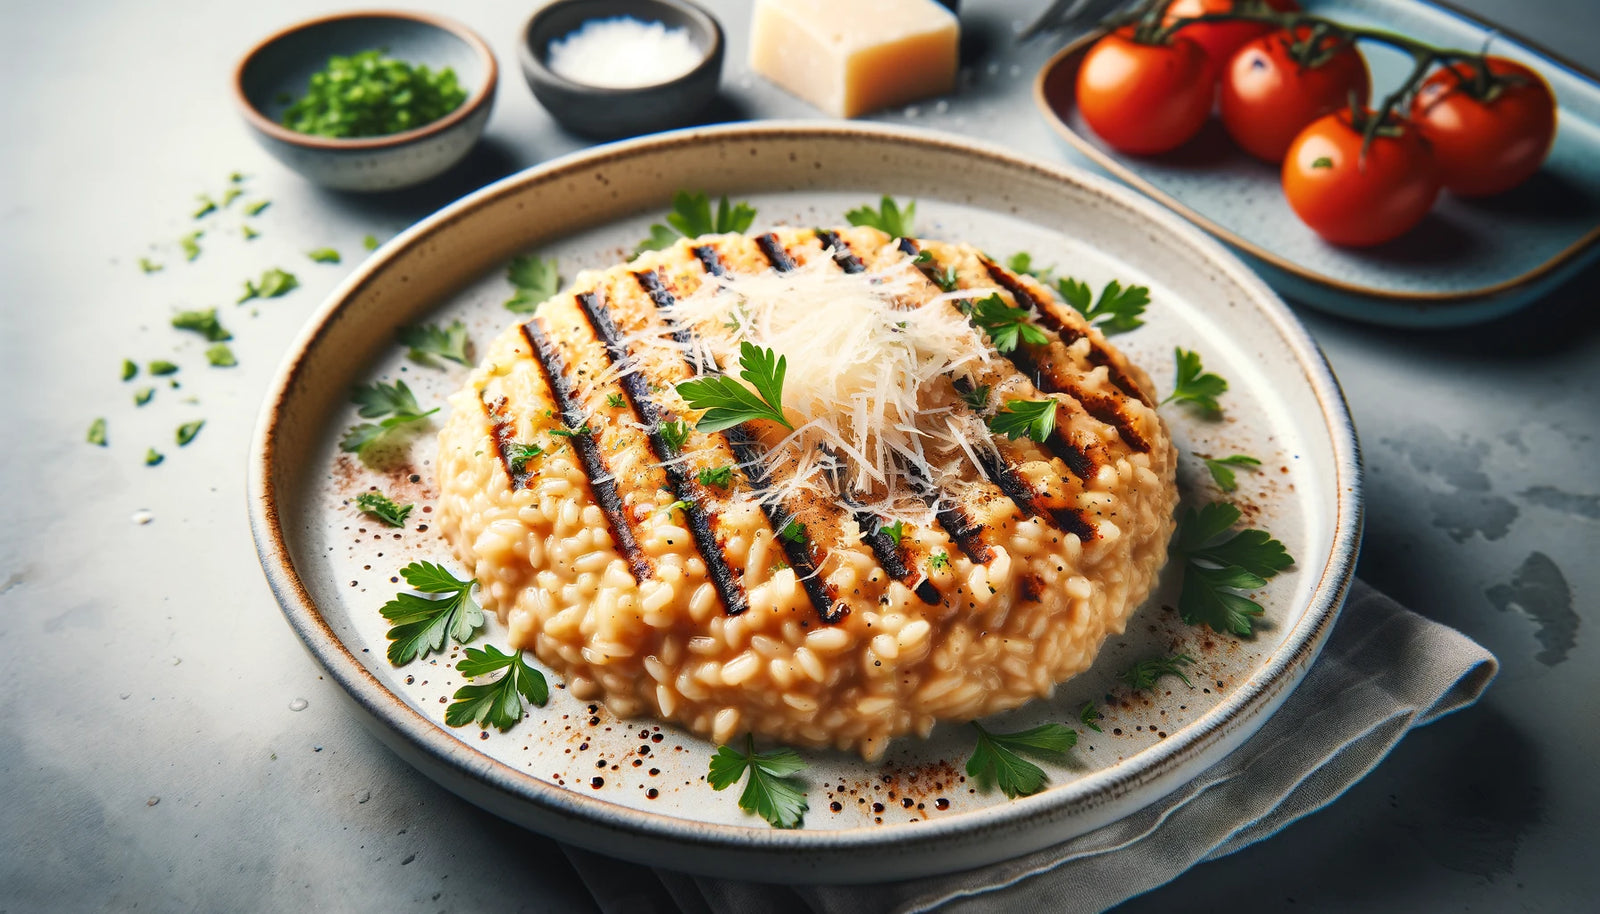 Perfect Grilled Risotto on the Arteflame Grill